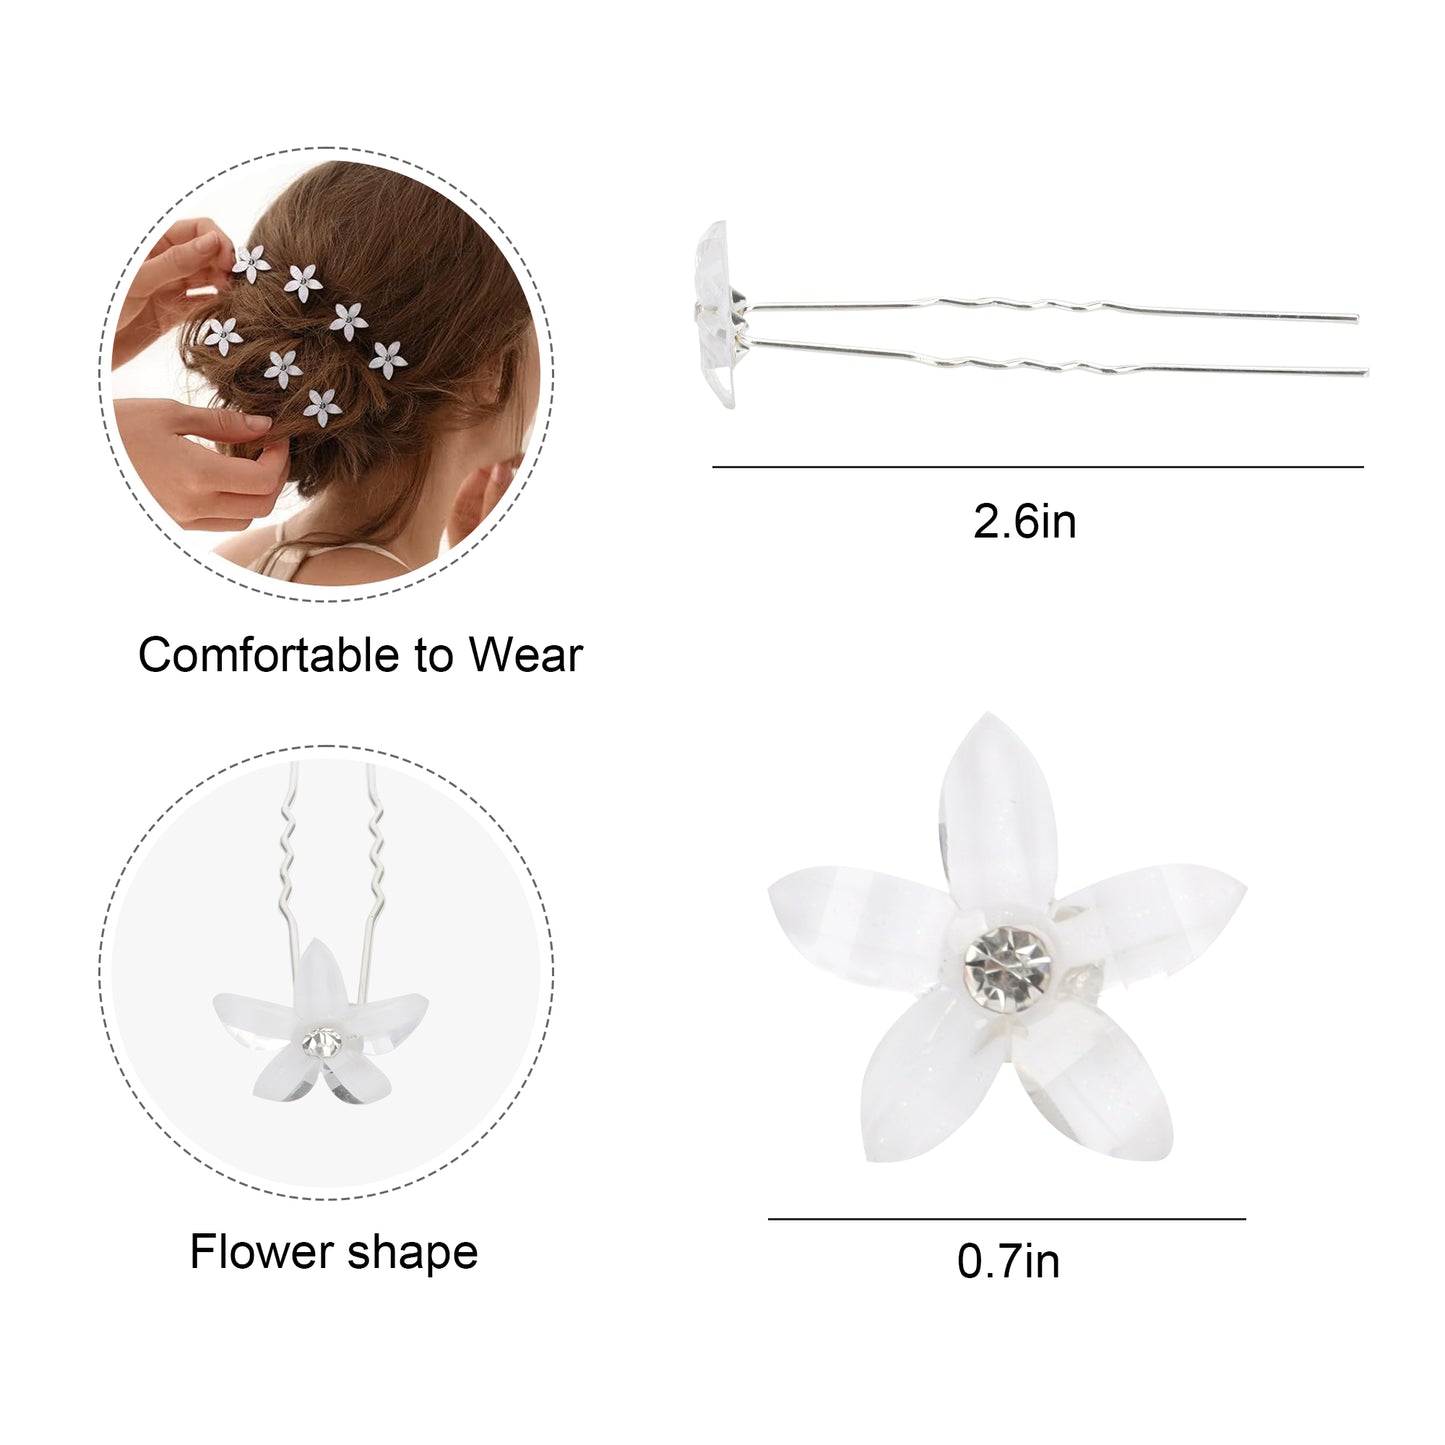 20Pcs U-Shaped Hair Pins - Hair Clips with Floral Design Hair Accessories Set for Weddings & Special Occasions